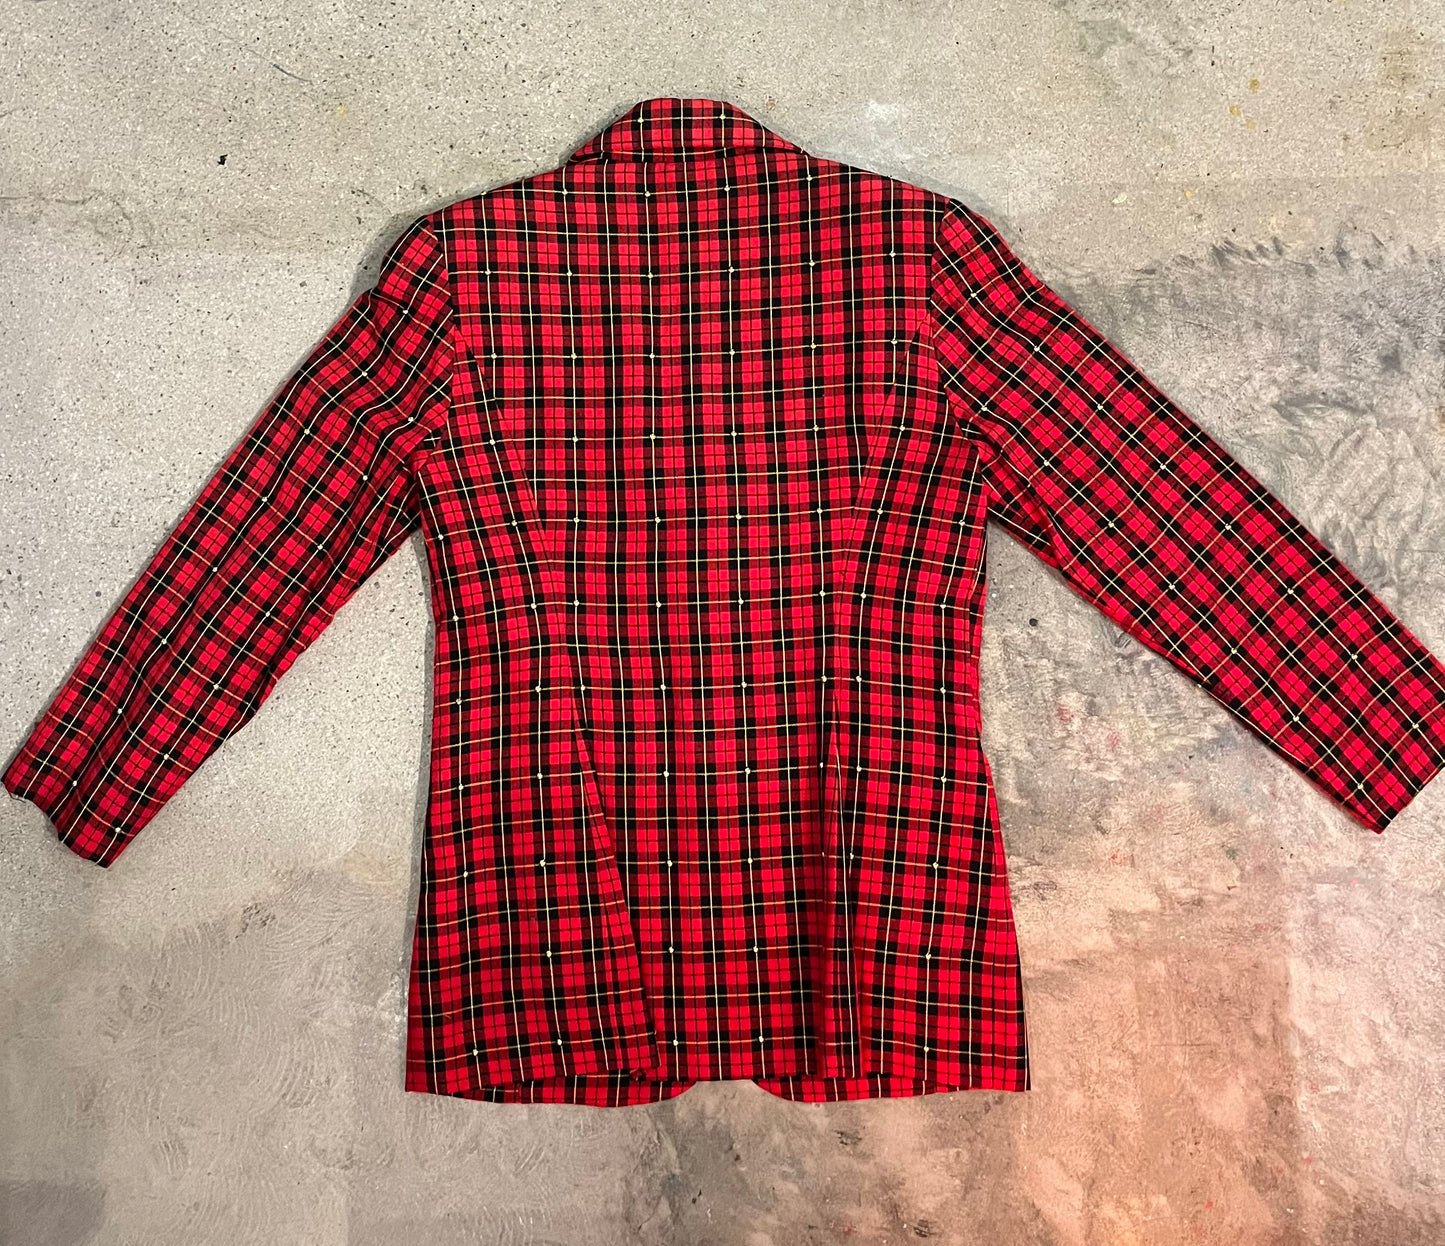 Red Tartan Plaid Women's Jacket with Gold Studs